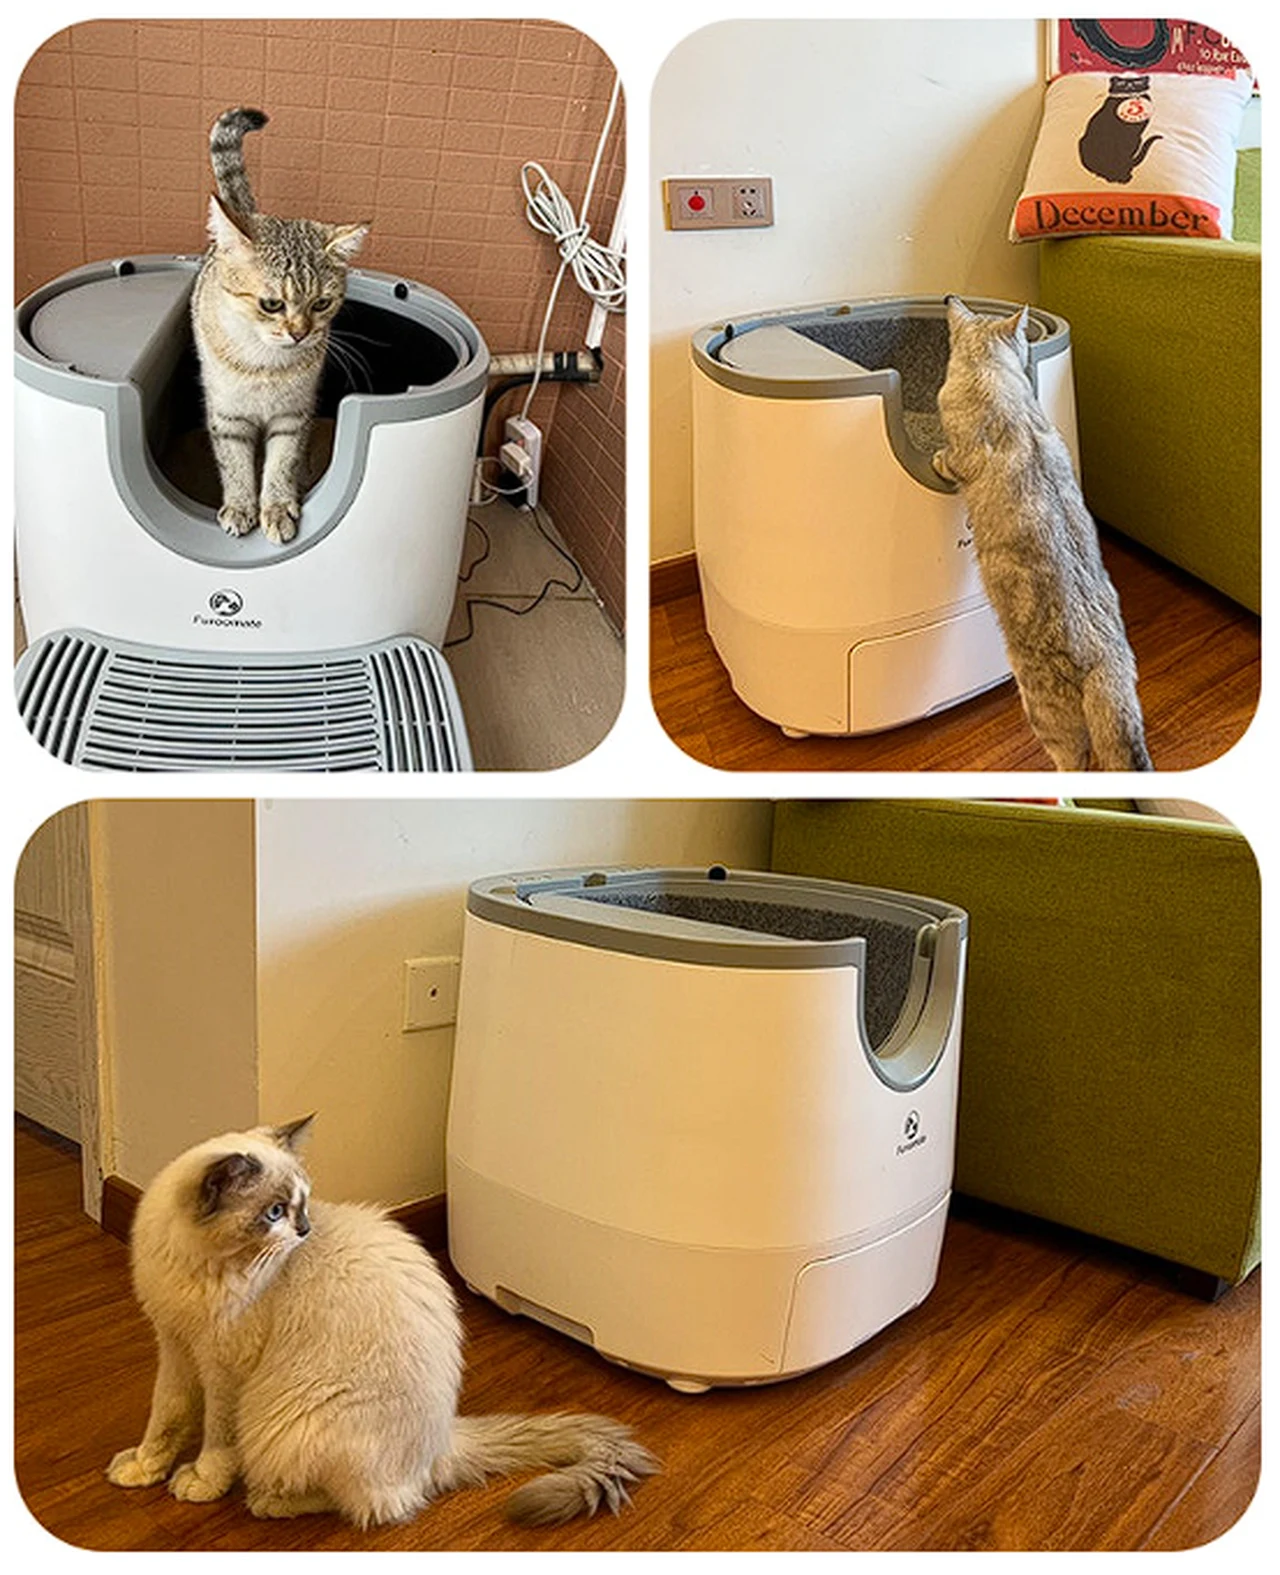 Furoomate cat litter box in action